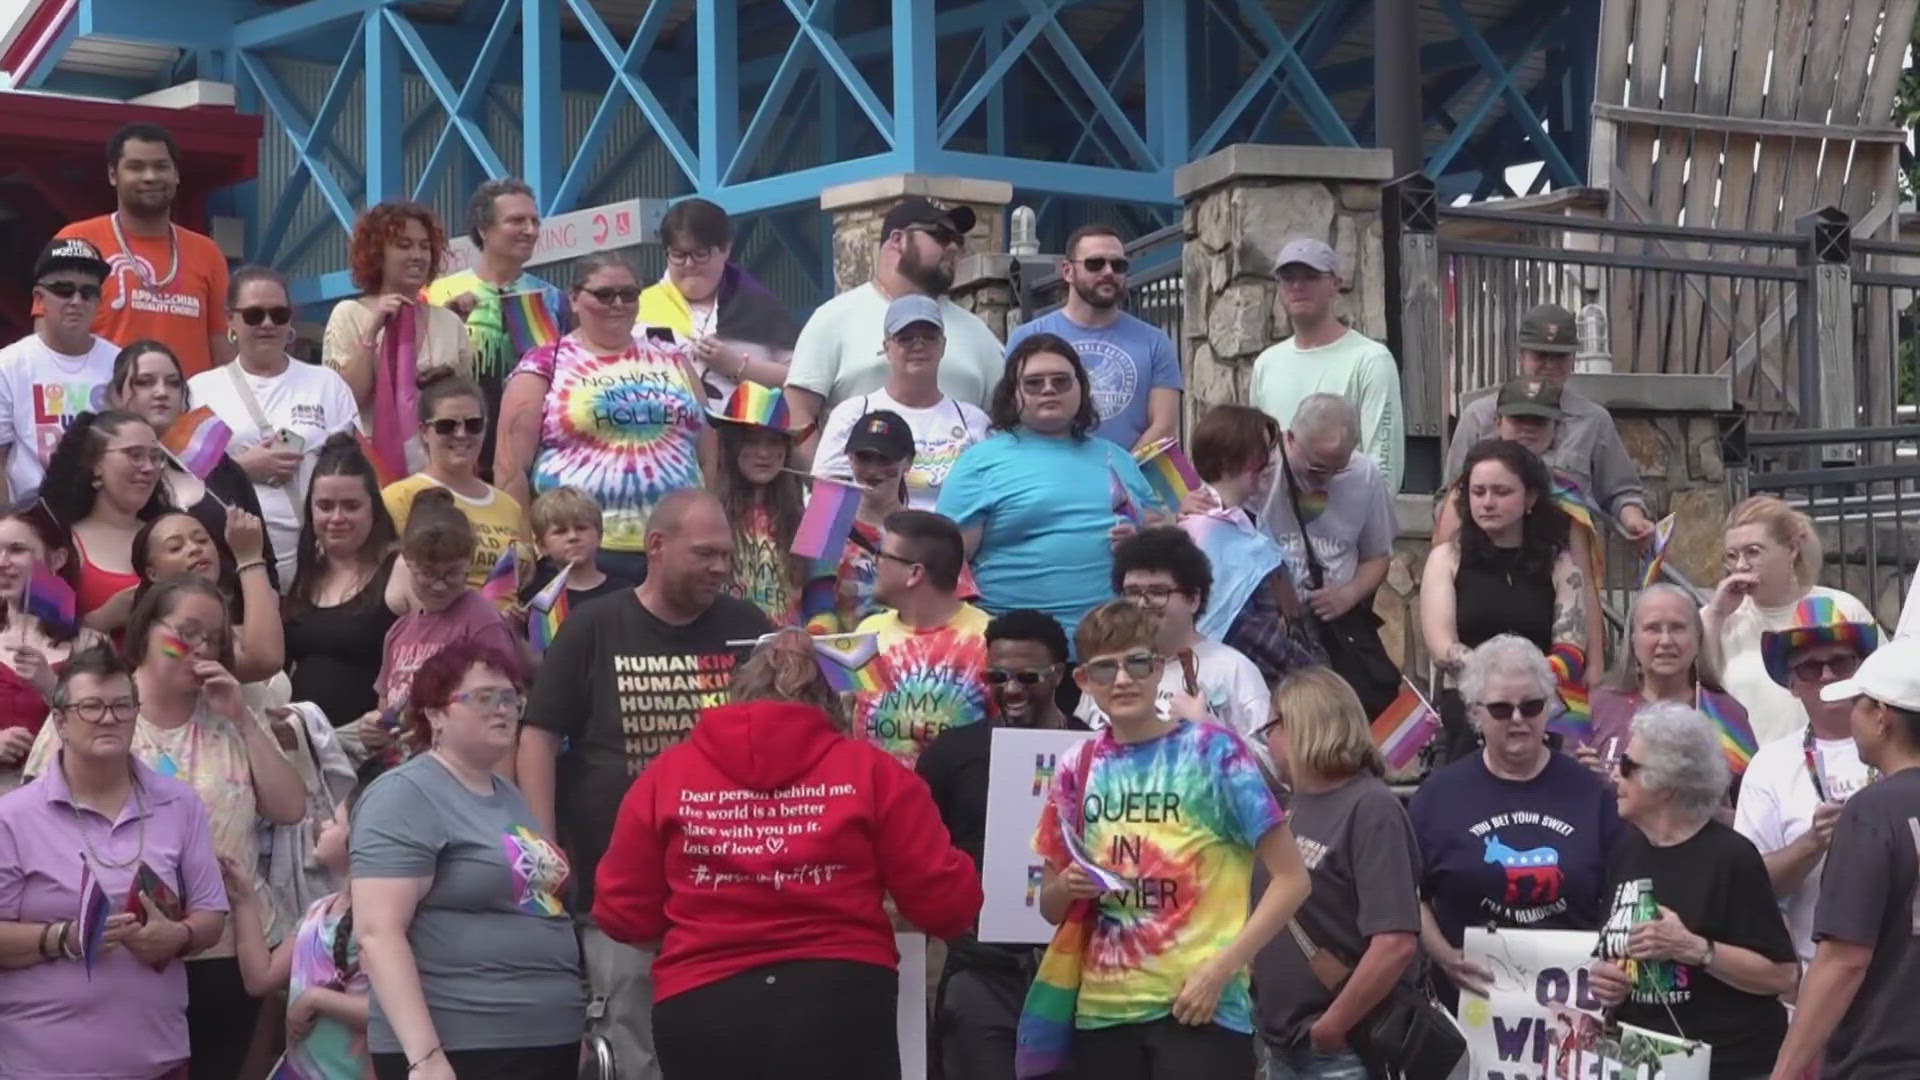 Several people took to the streets in Gatlinburg to show support for the LGBTQ community.